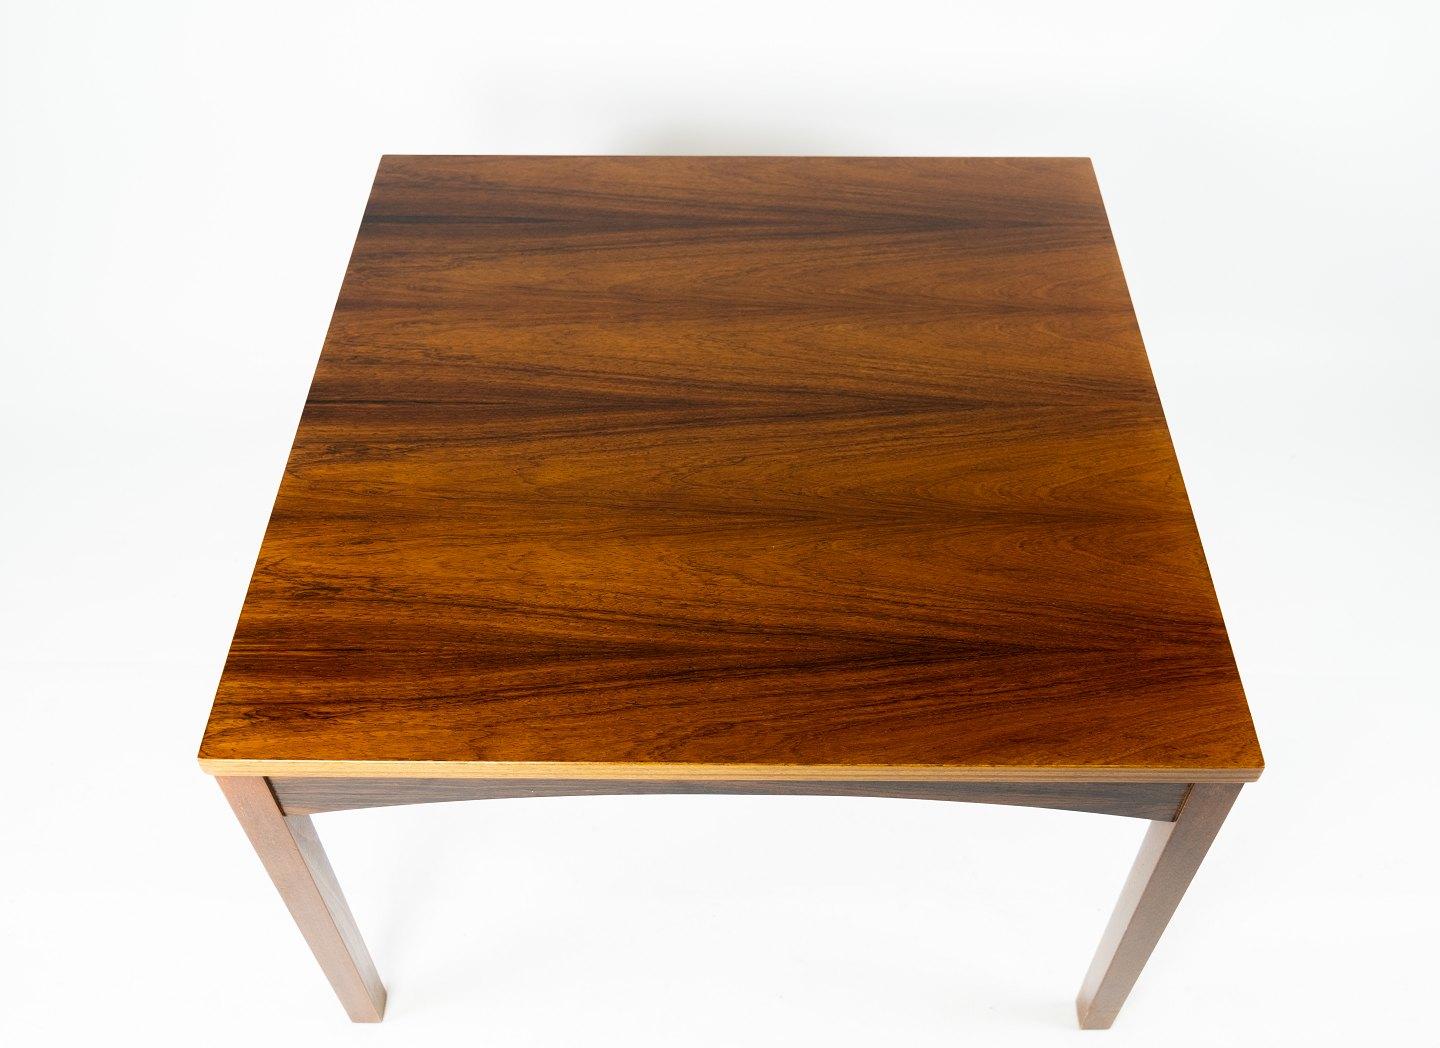 Mid-20th Century Coffee Table in Rosewood of Danish Design from the 1960s For Sale